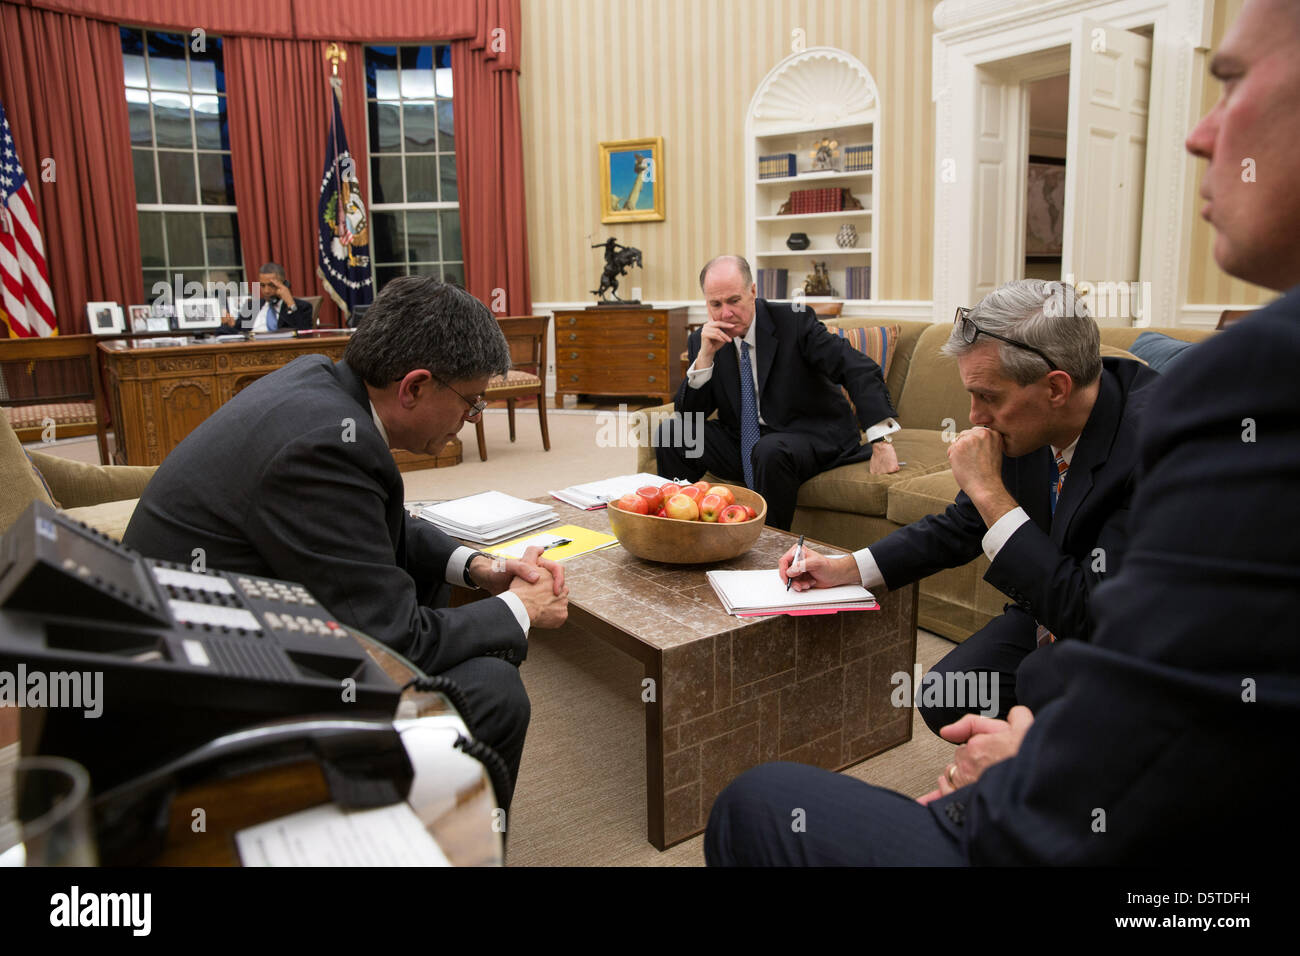 President Barack Obama talks on the phone with Egyptian President Mohammed Morsi in the Oval Office, November 14, 2012. Chief of Staff Jack Lew, National Security Advisor Tom Donilon, and Deputy National Security Advisor Denis McDonough listen in the foreground. Mandatory Credit: Pete Souza - White House via CNP Stock Photo